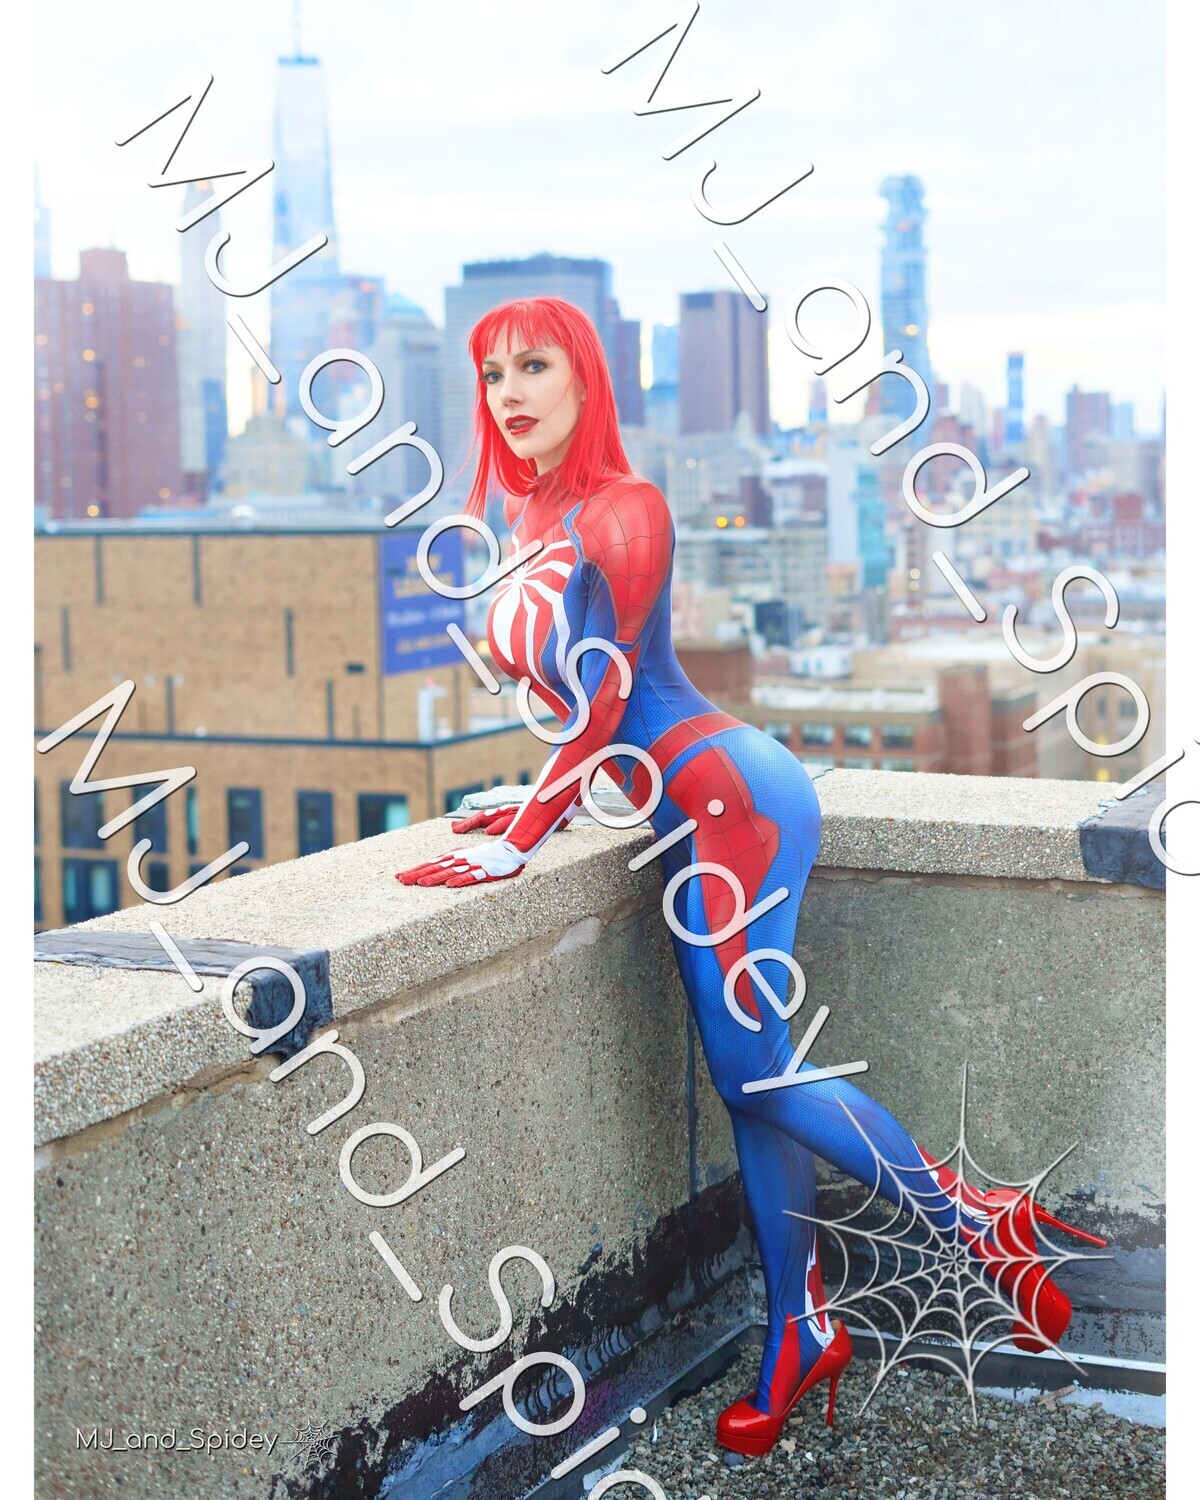 Marvel - Spider-Man - Mary Jane Watson - PS4 Insomniac Spider-Suit 4 - Cosplay Print (@MJ_and_Spidey, MJ and Spidey, Comics)